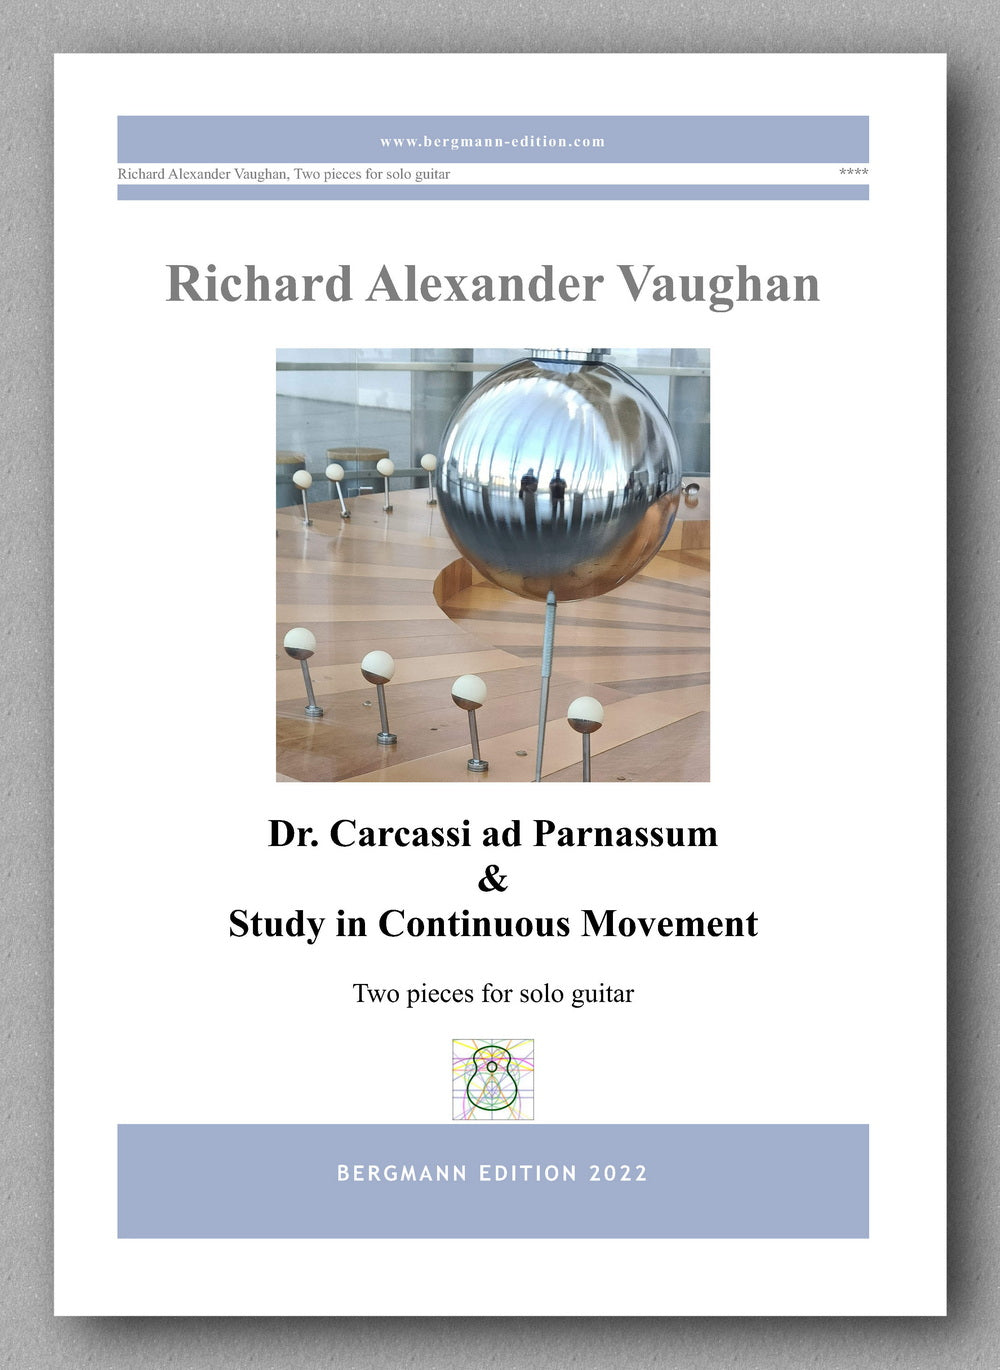 Richard Alexander Vaughan, Dr. Carcassi ad Parnassum & Study in Continuous Movement - preview of the cover